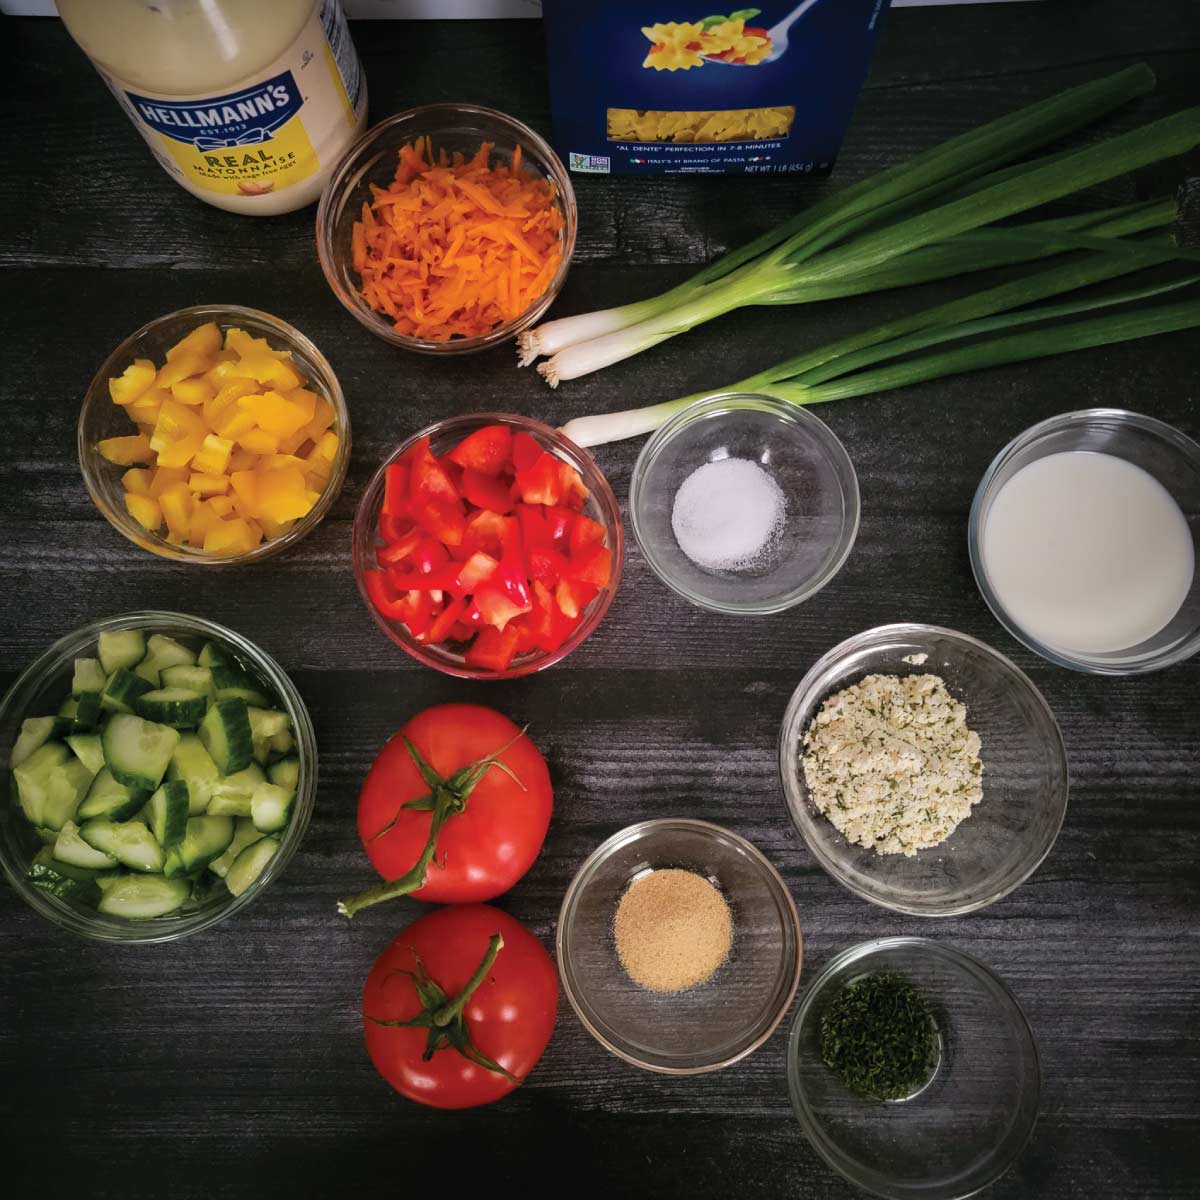 Ingredients prepped for the pasta salad - mayonnaise, pasta, shredded carrot, scallions, milk, salt, chopped red pepper, chopped yellow pepper, cut cucumber, tomatoes, garlic powder, ranch seasoning parsley for garnish.